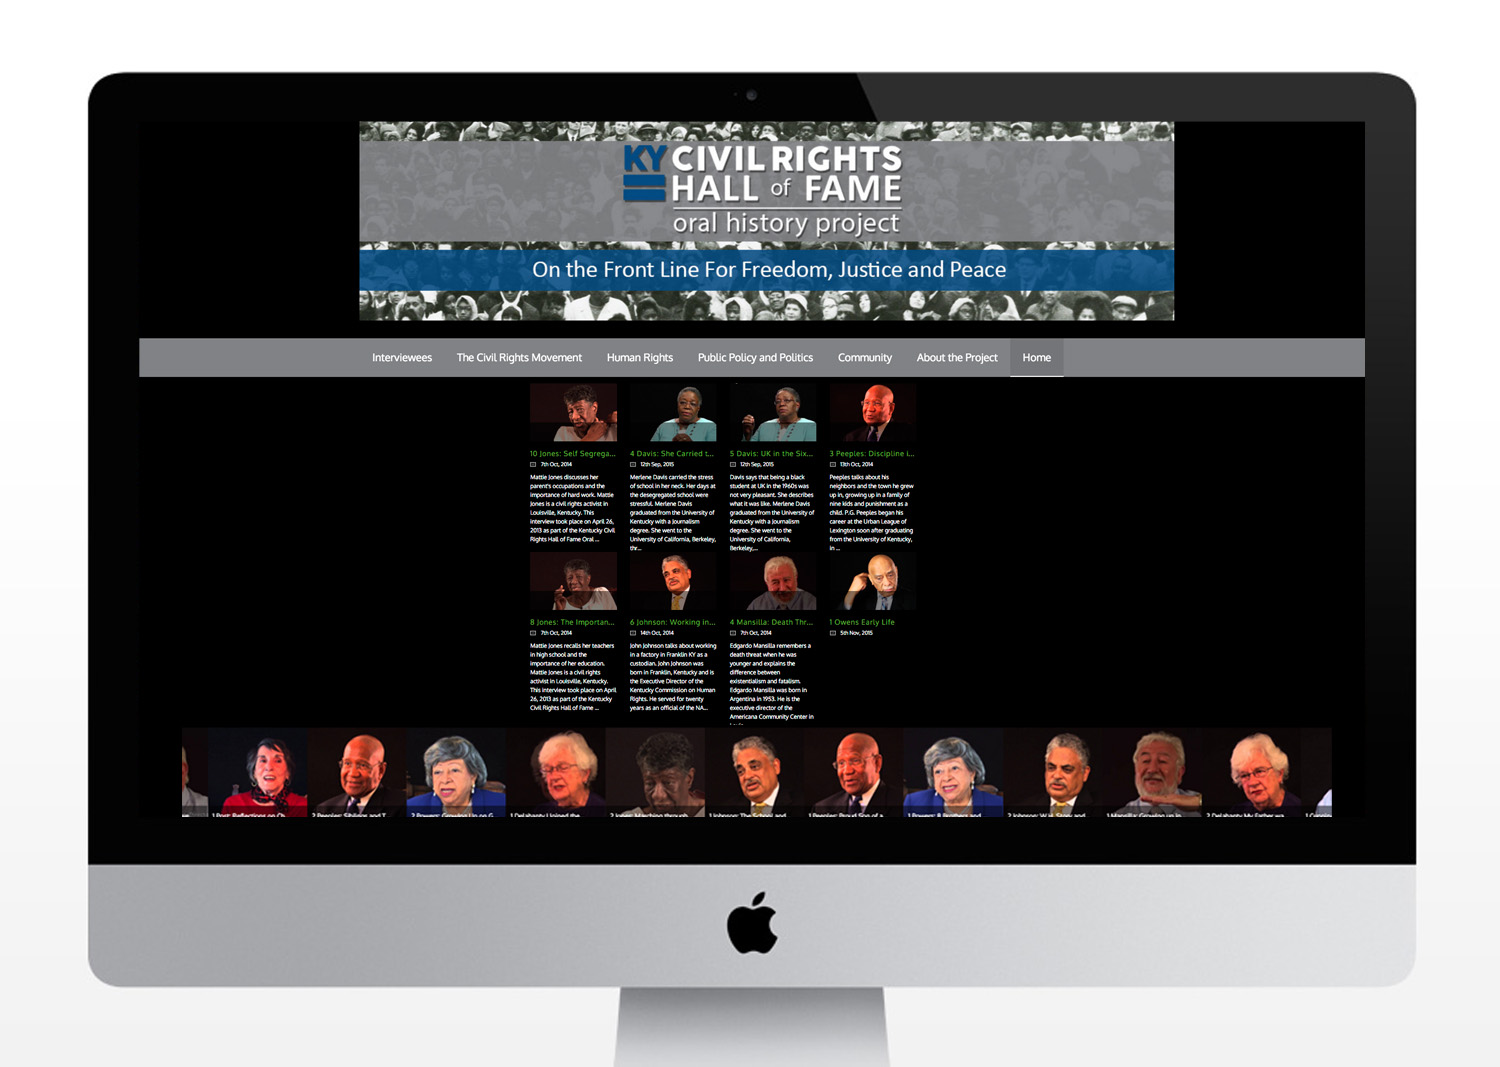 Kentucky Civil Rights Hall of Fame Oral History Project Website